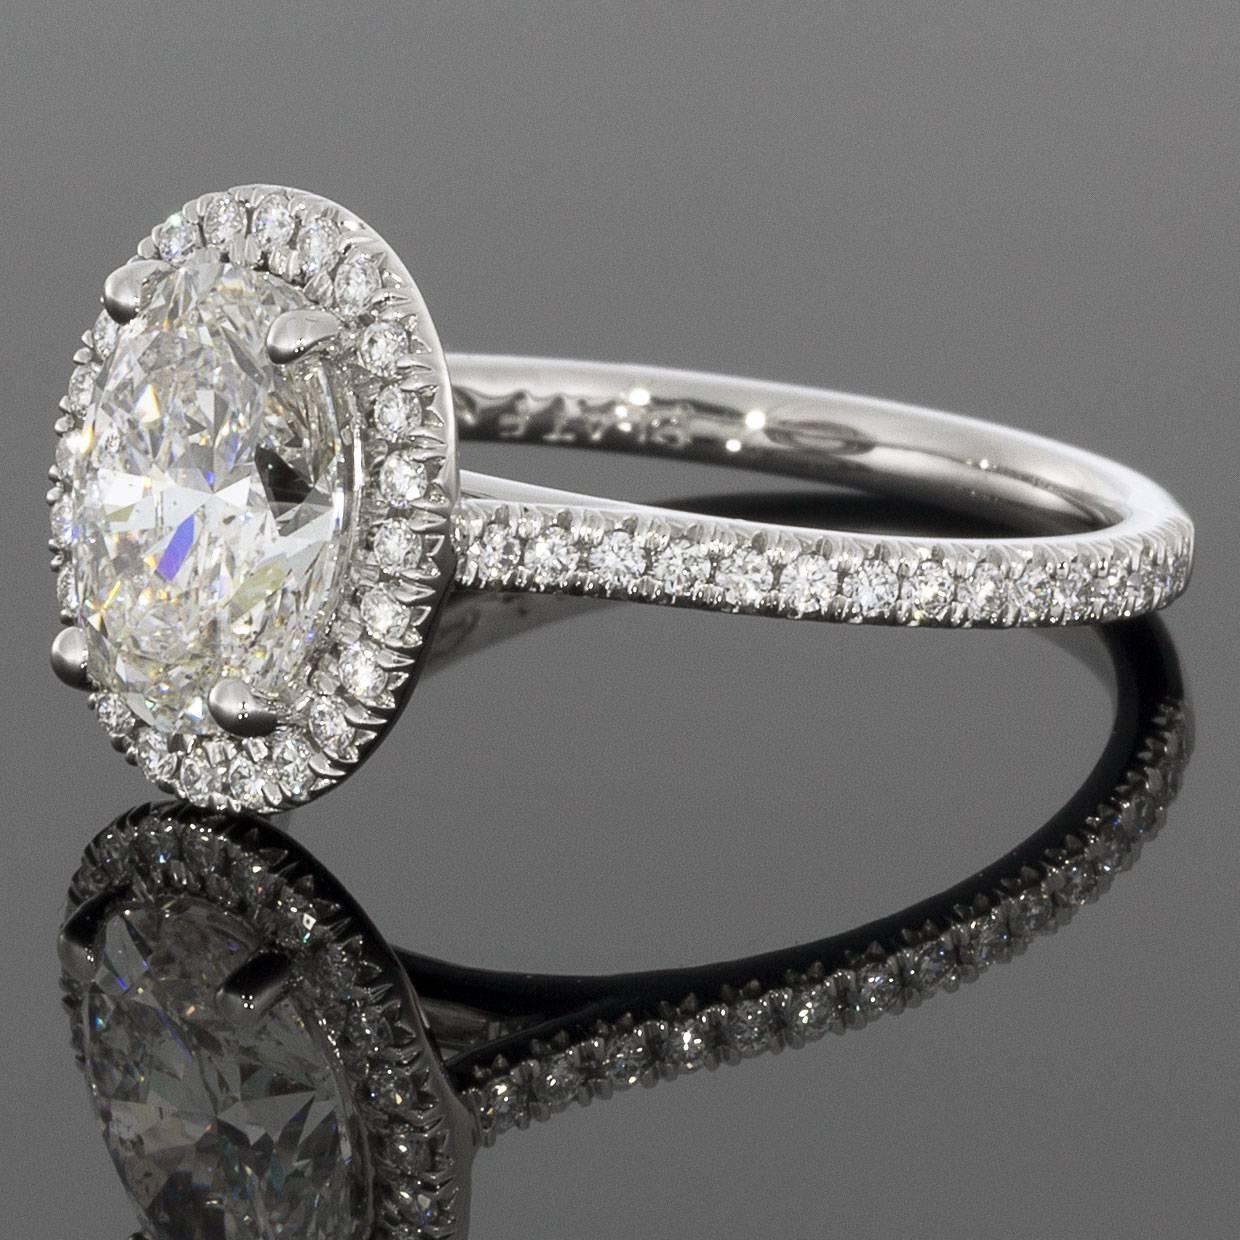 Take her breath away with this spectacular 2.12CTW diamond ring from Martin Flyer! This 65 year old, third generation family-owned business handcrafts all their rings with extraordinary attention to detail, using only the highest quality, Hearts &